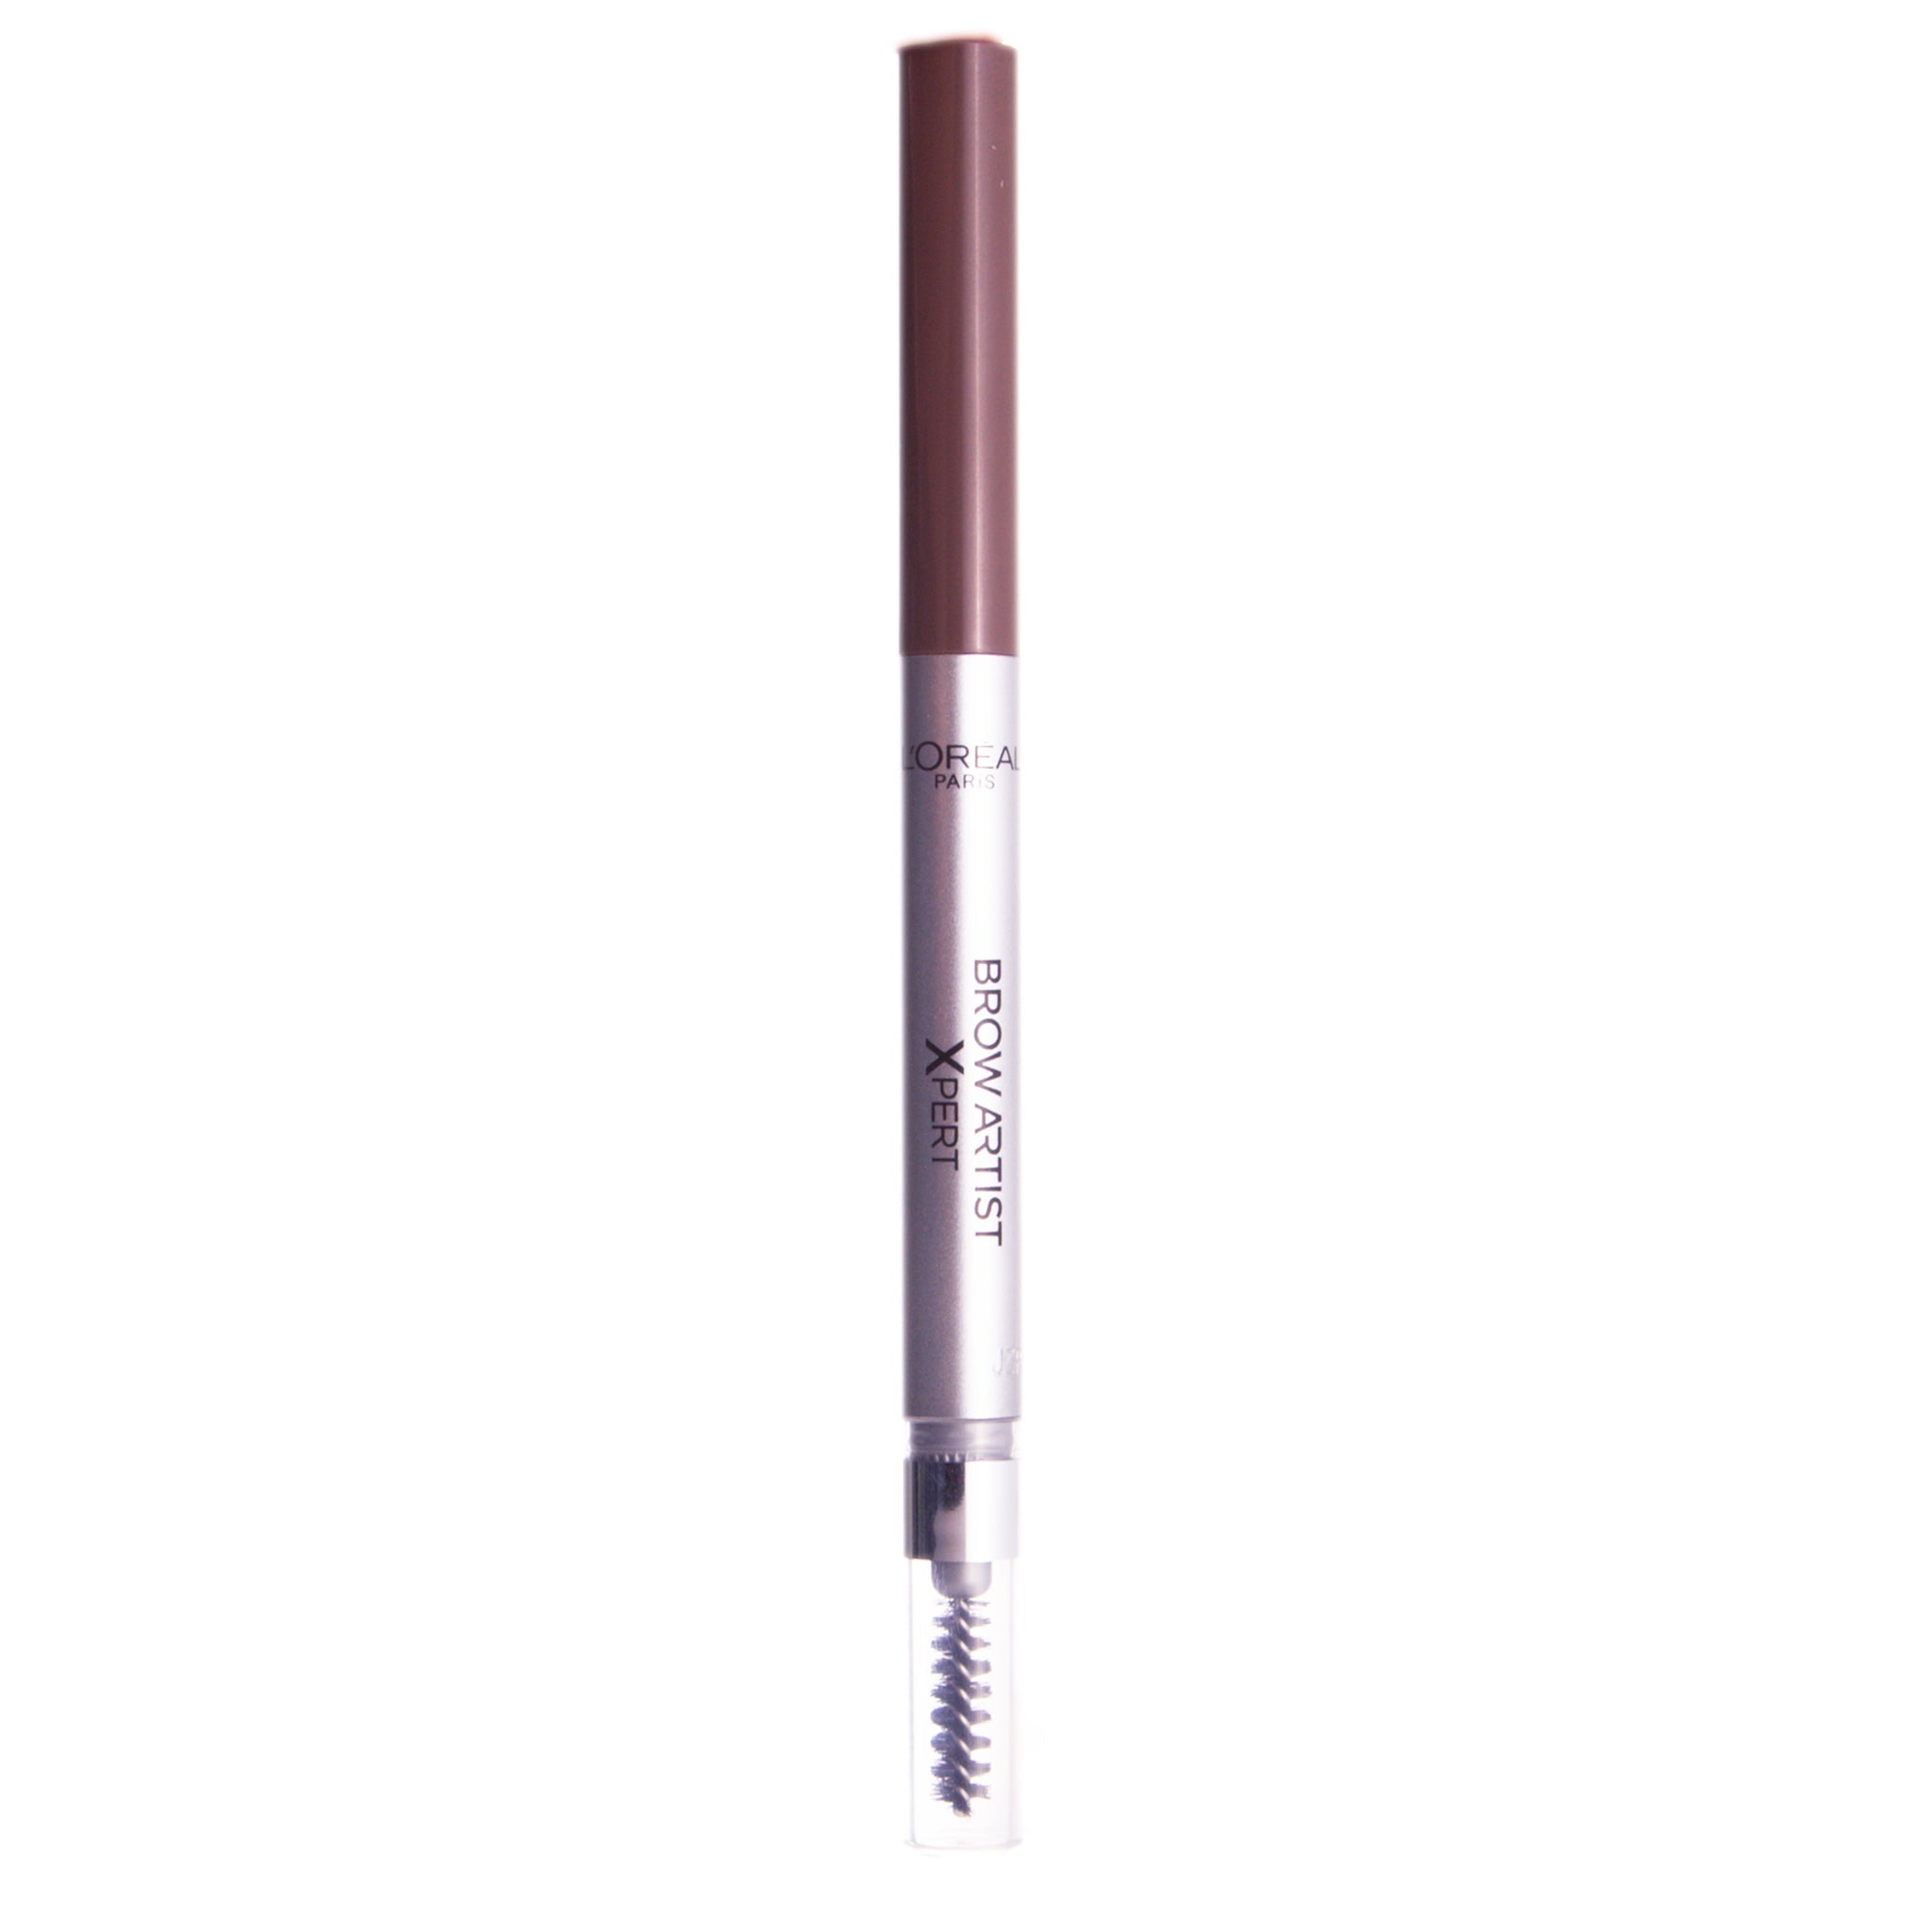 L'Oreal Brow Artist Xpert Brow Pencil - 107 Cool Brunette